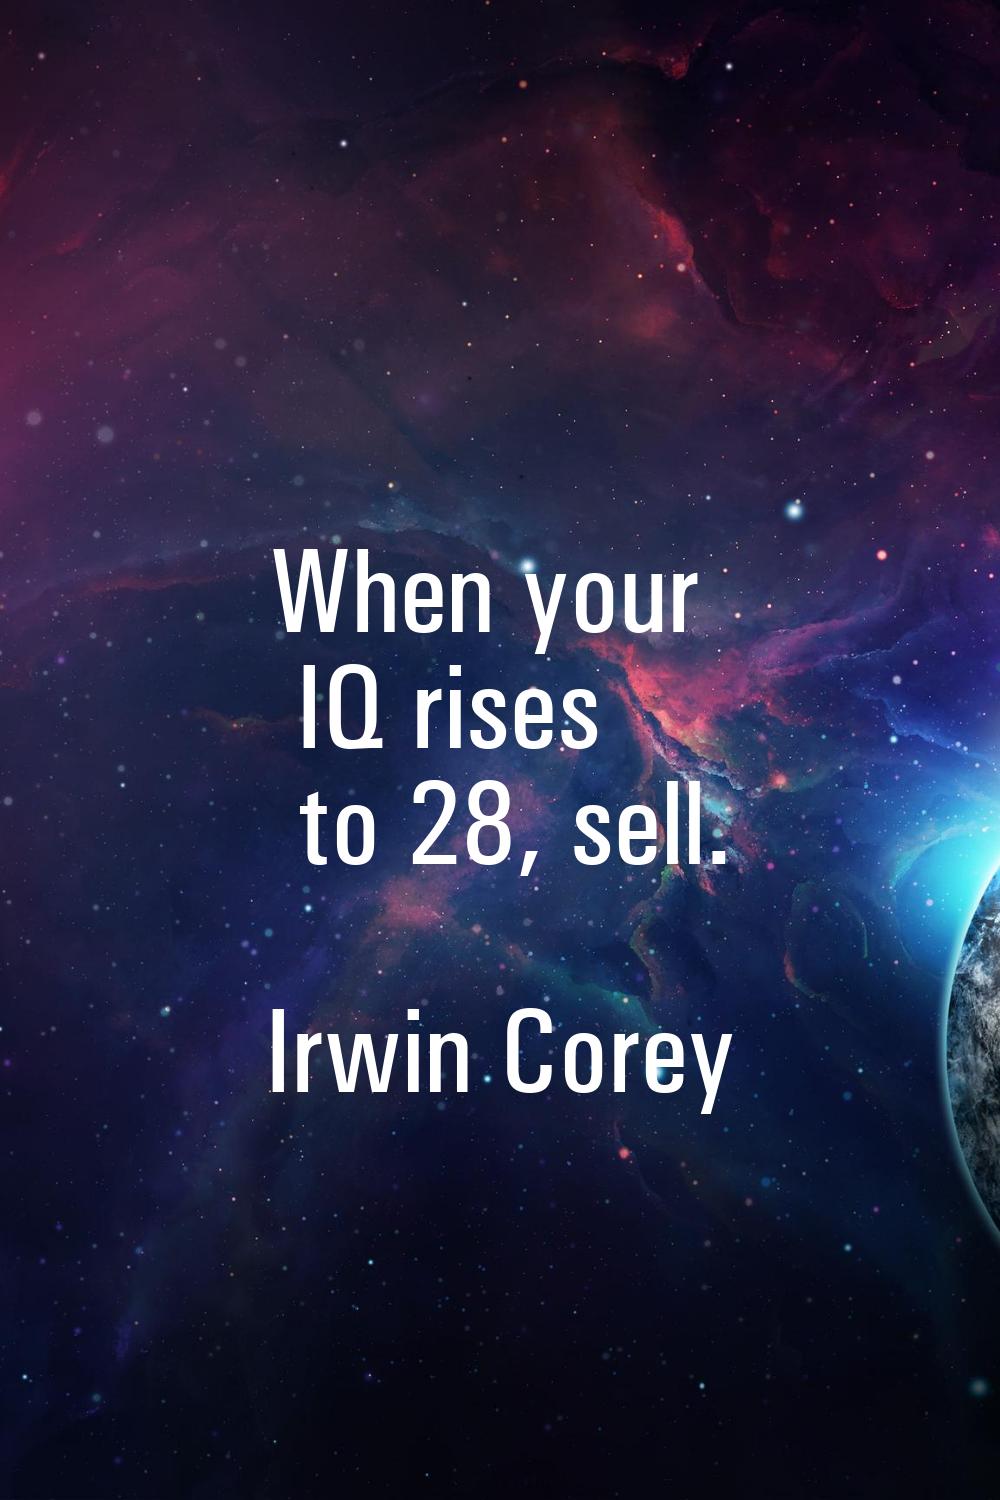 When your IQ rises to 28, sell.